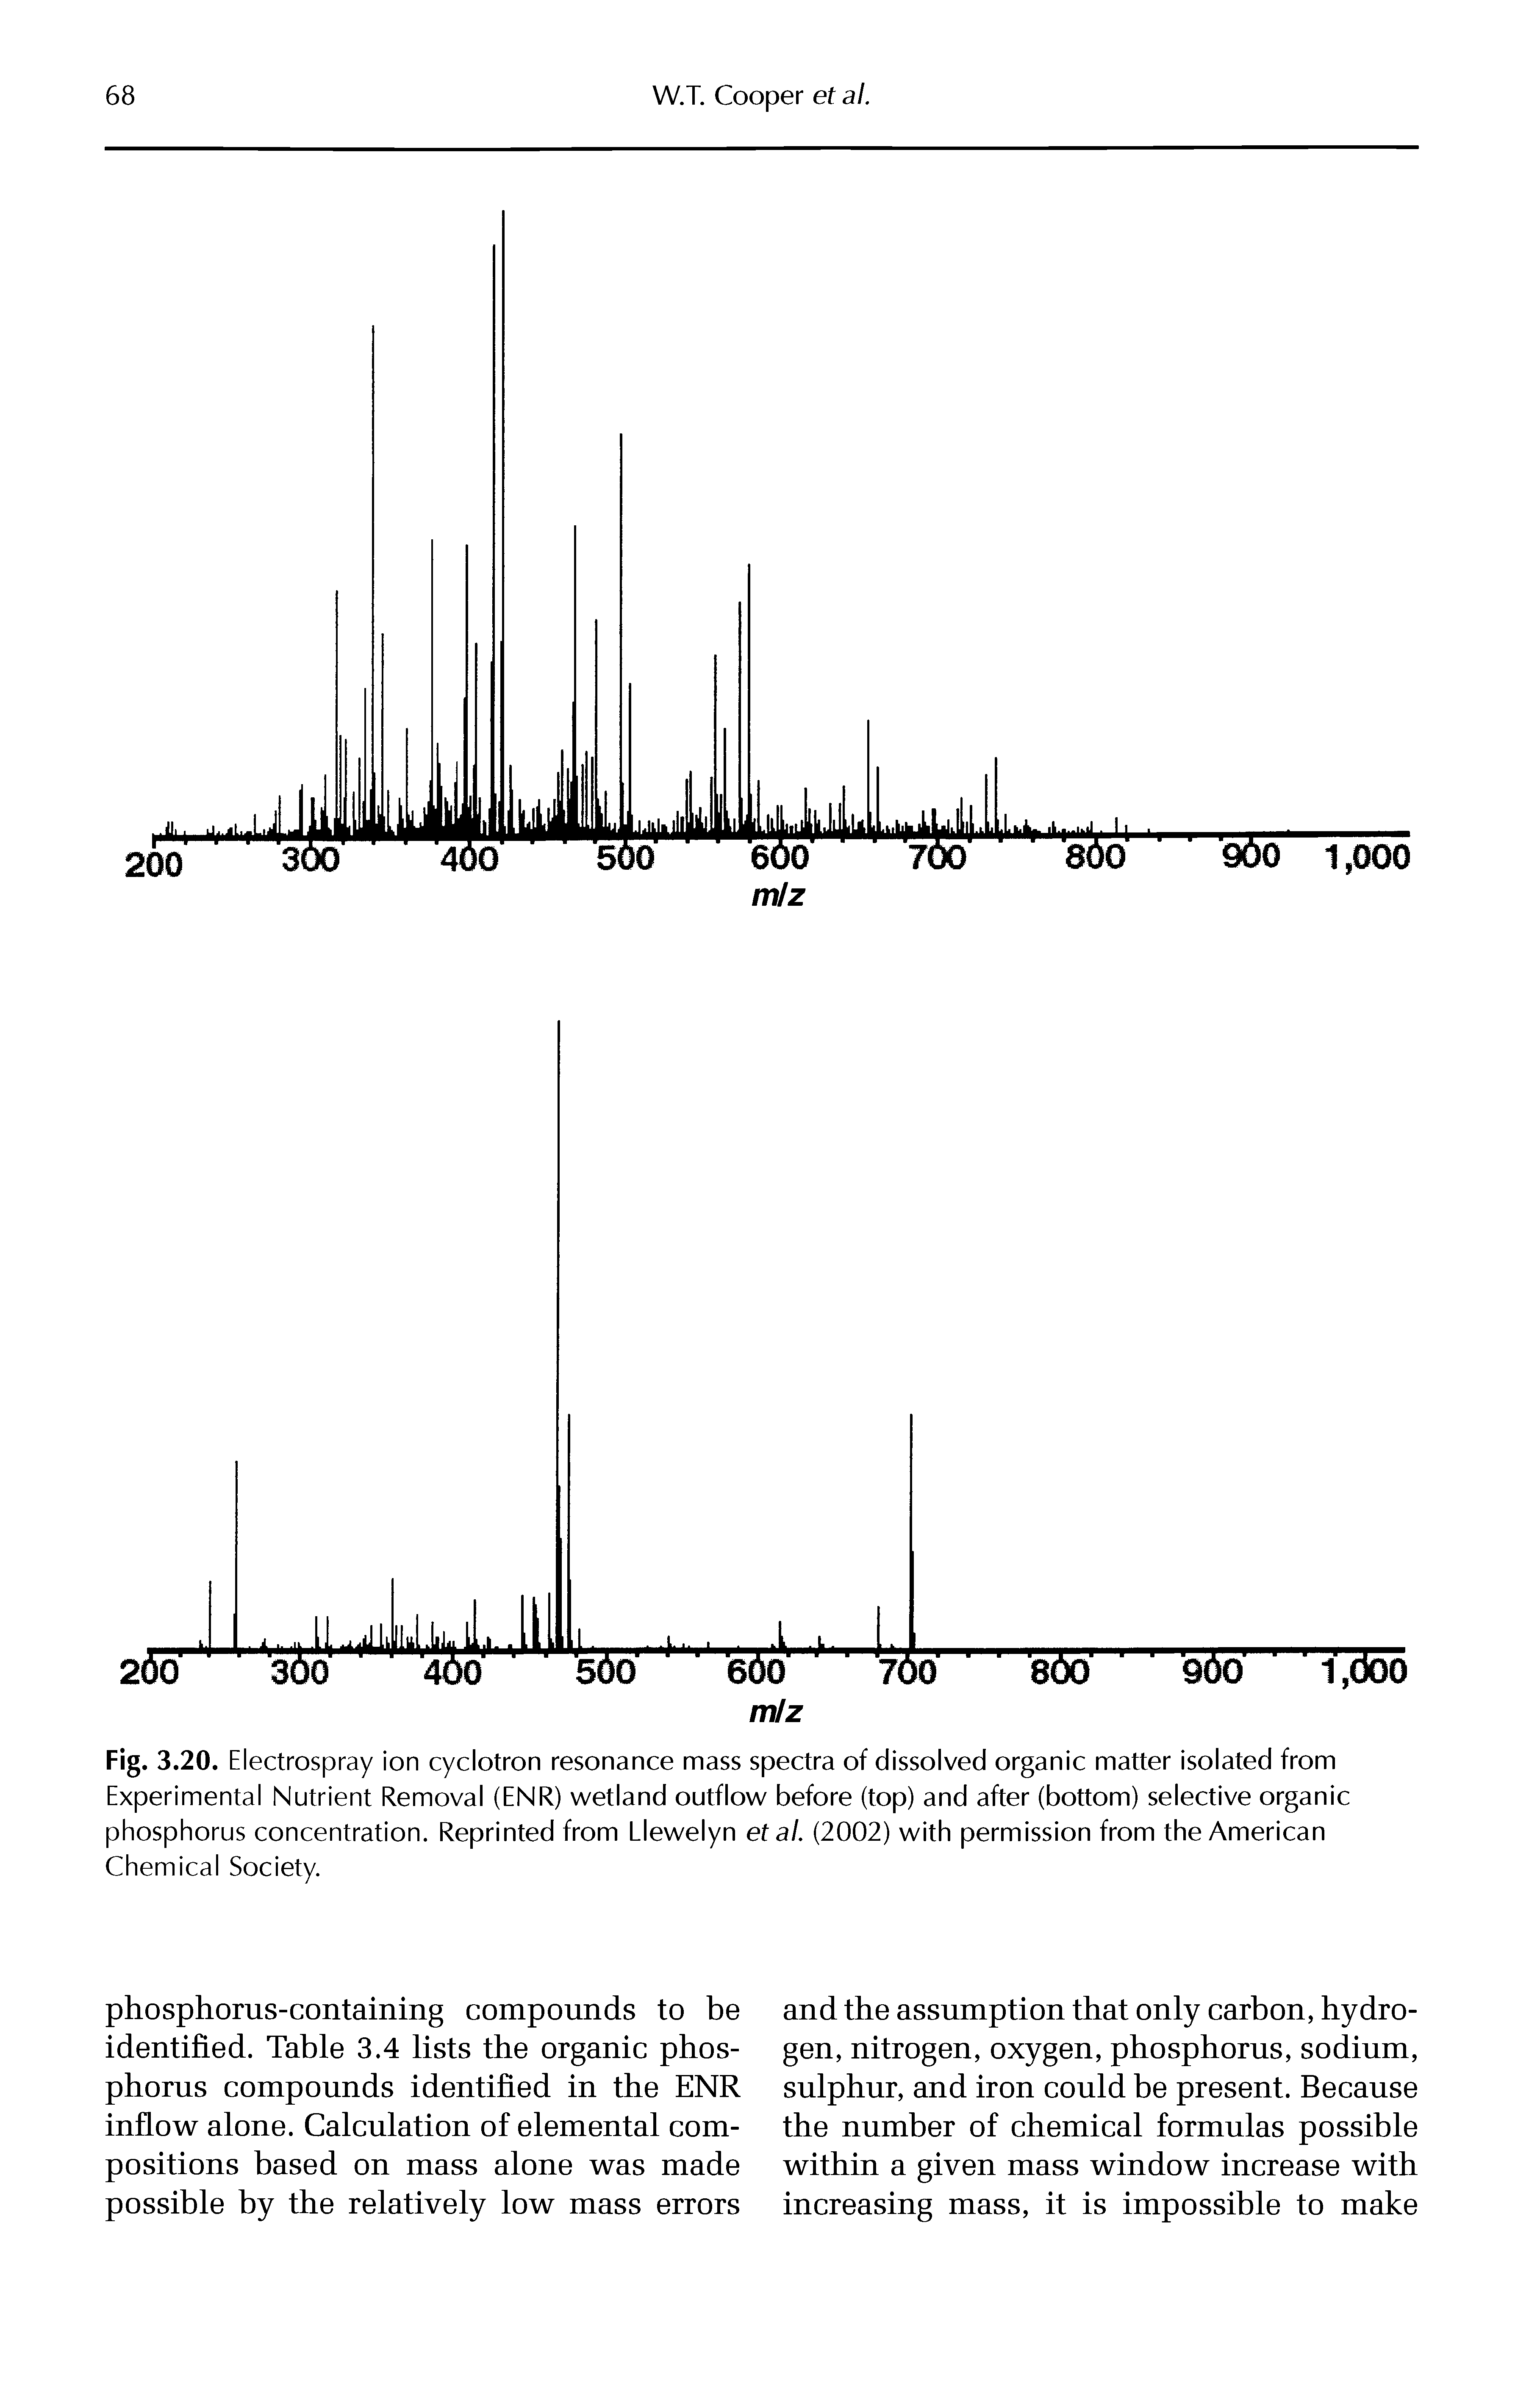 Fig. 3.20. Electrospray ion cyclotron resonance mass spectra of dissolved organic matter isolated from Experimental Nutrient Removal (ENR) wetland outflow before (top) and after (bottom) selective organic phosphorus concentration. Reprinted from Llewelyn etal. (2002) with permission from the American Chemical Society.